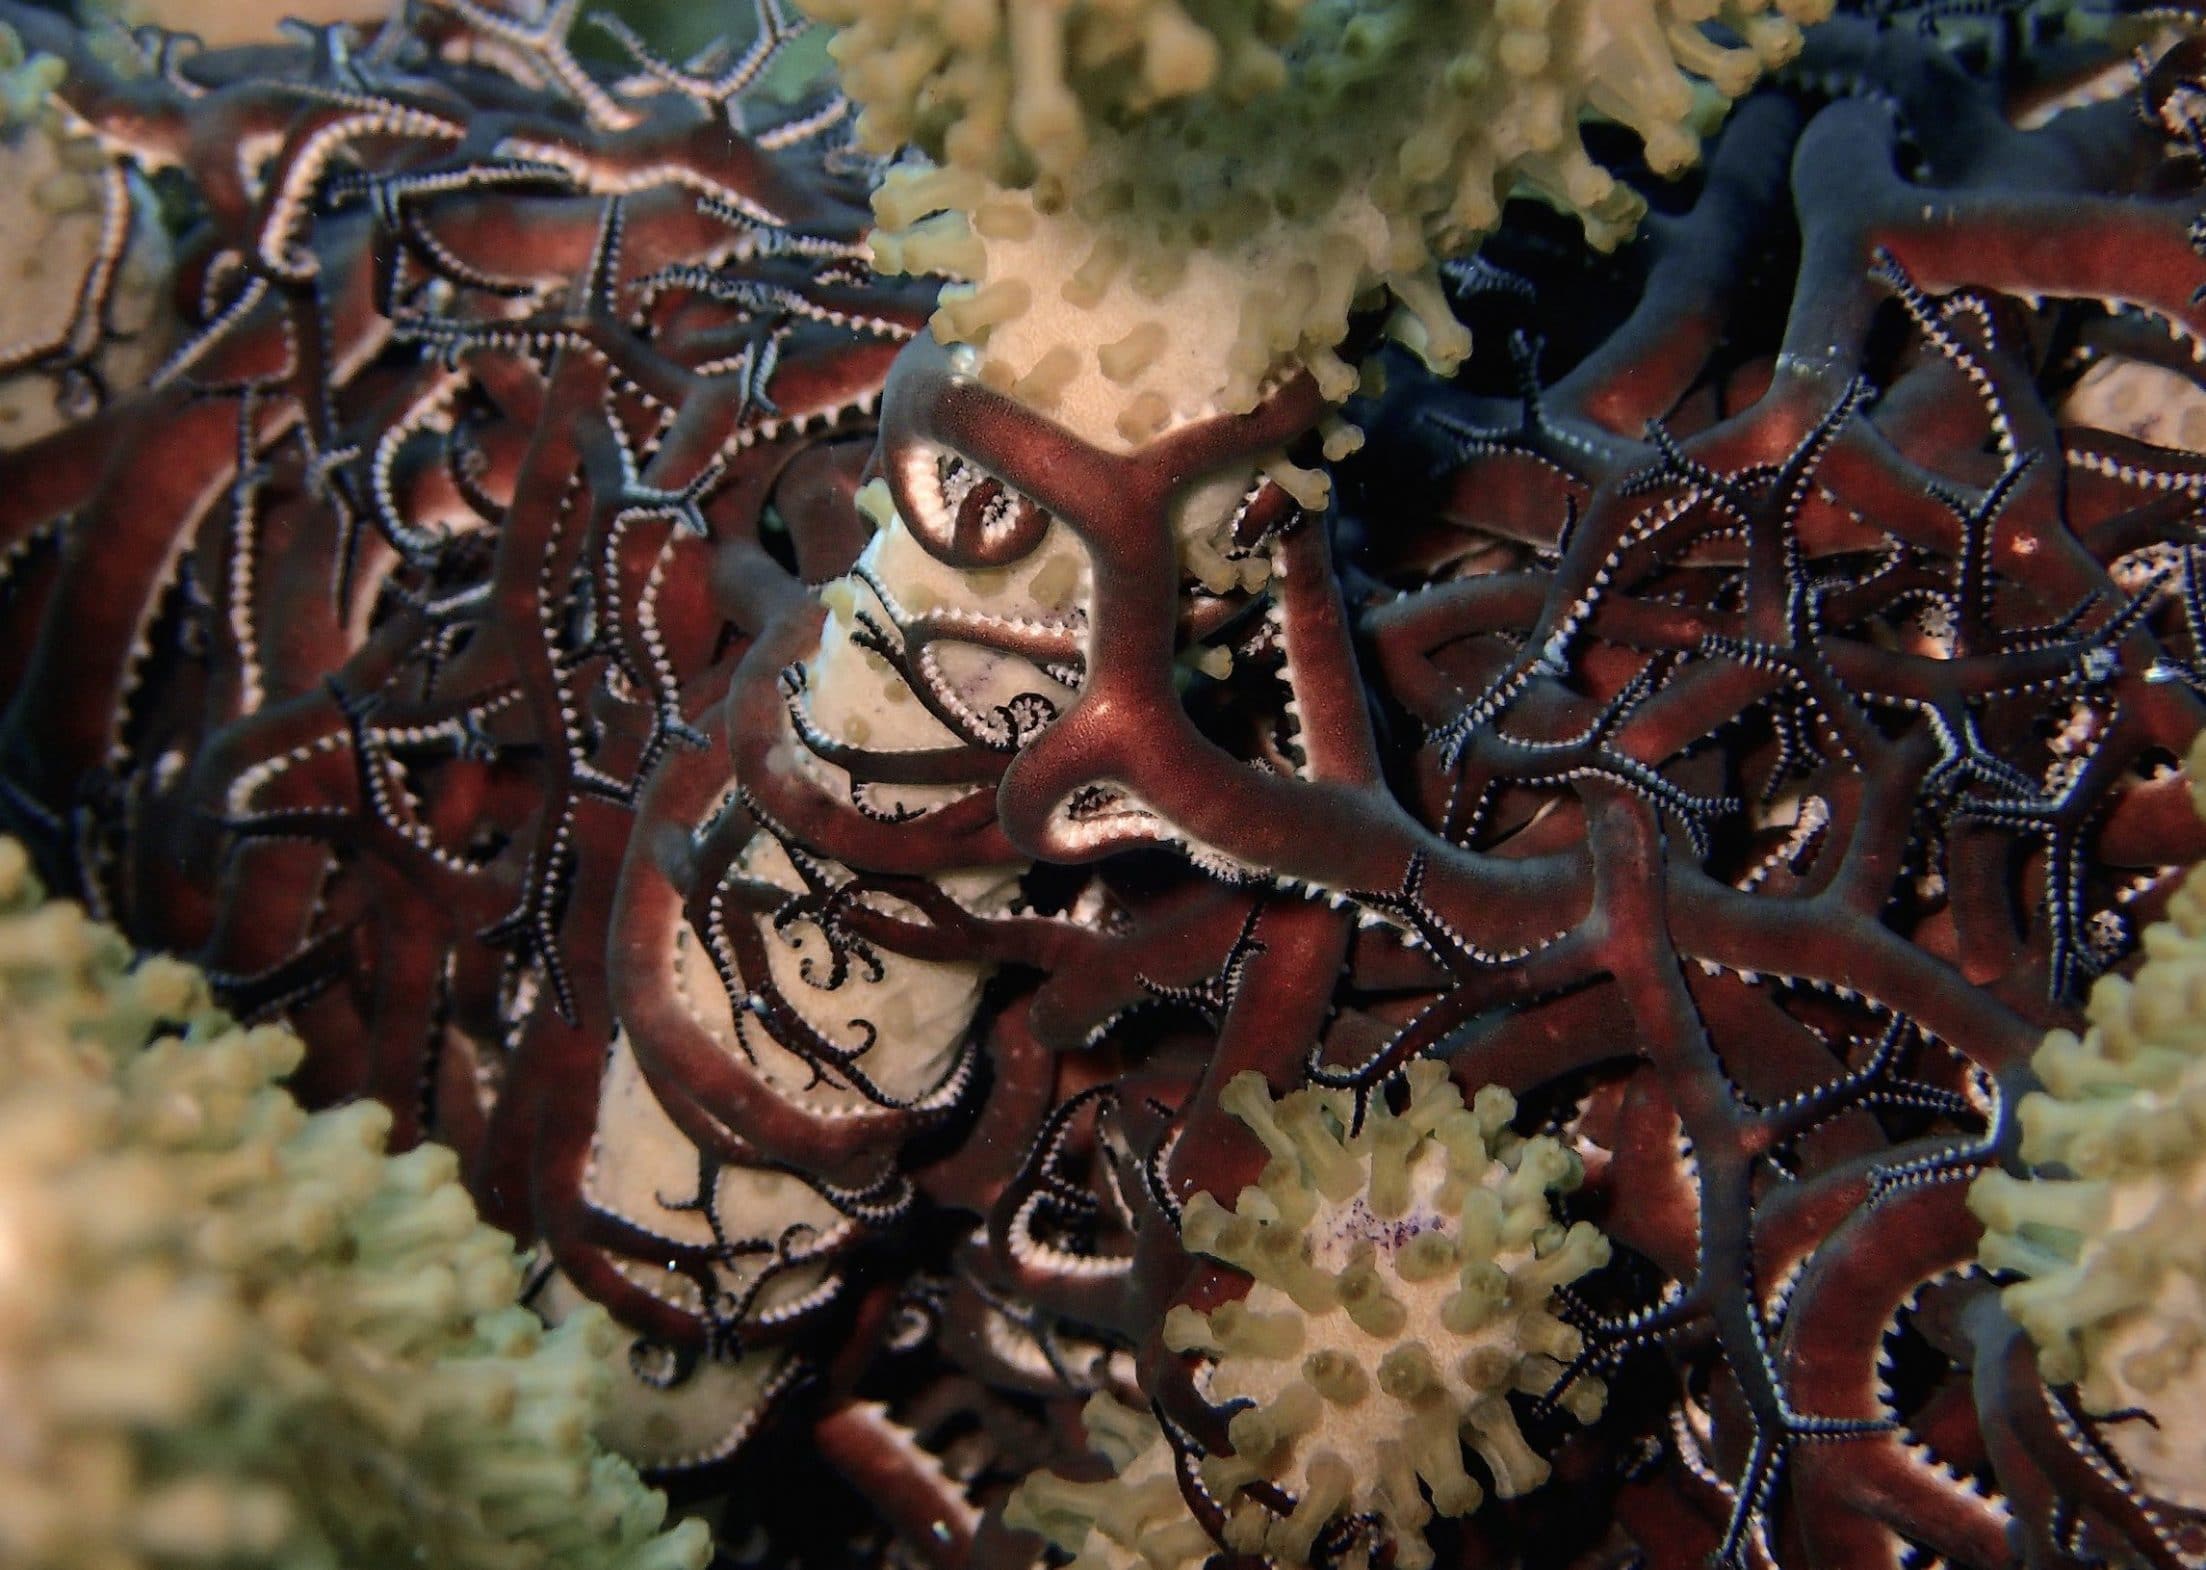 Red-brown basket star clinging to arms of gorgonian coral in Cozumel.